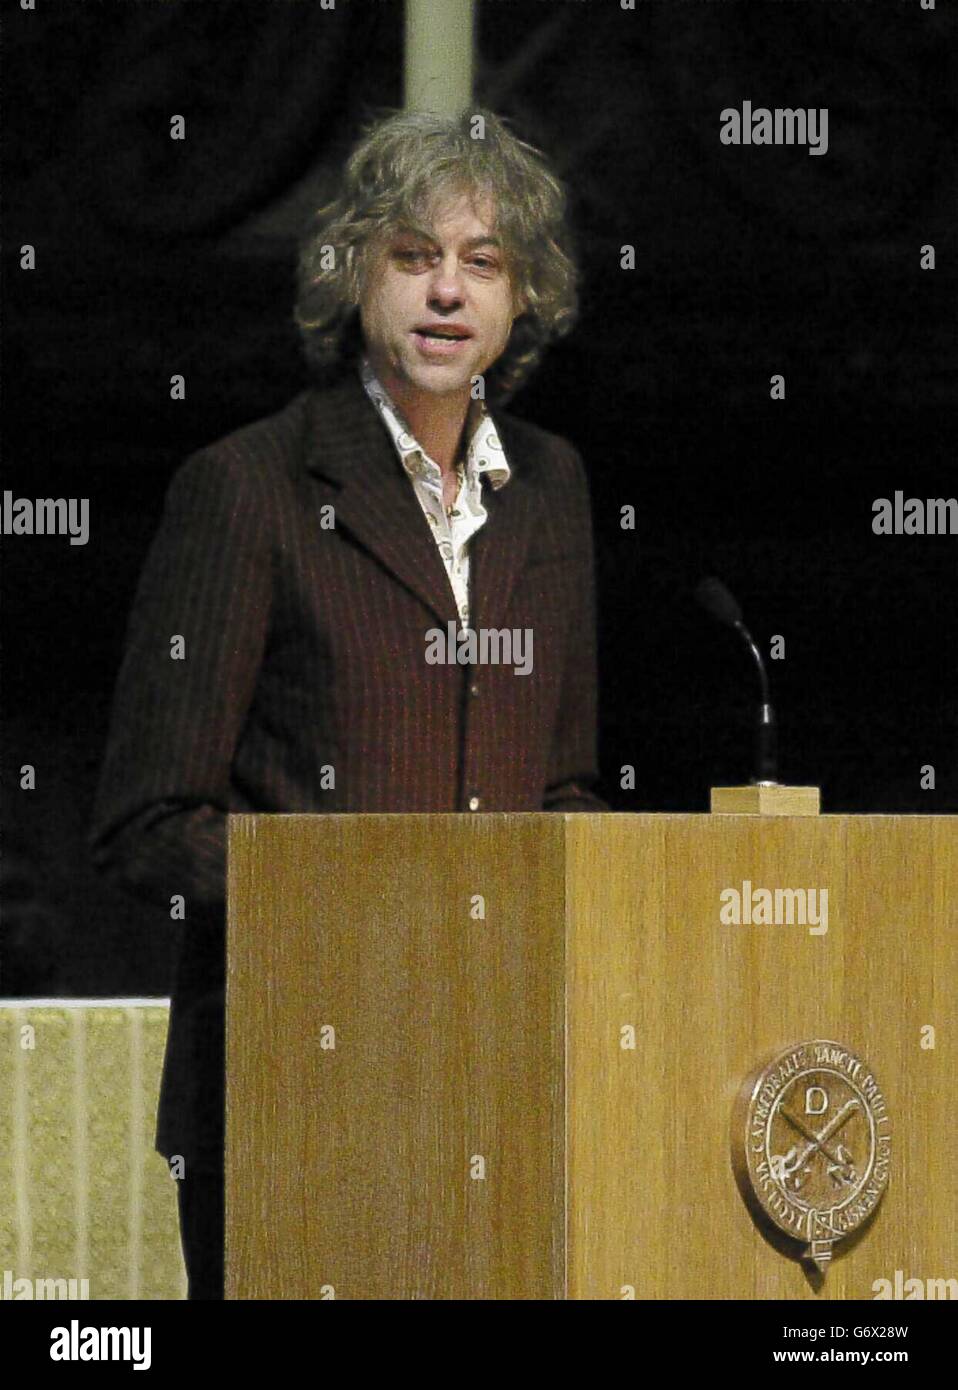 Sir Bob Geldof delivers an address on the state of poverty in Africa at the bi-annual lecture of the Bar Human Rights Committee of England at St Paul's Cathedral, London. Sir Bob Geldof tonight called on the leaders of the world's richest nations to personally lead a new Commission for Africa to determine how the West can aid a continent he describes as a '4th world' underclass. Stock Photo